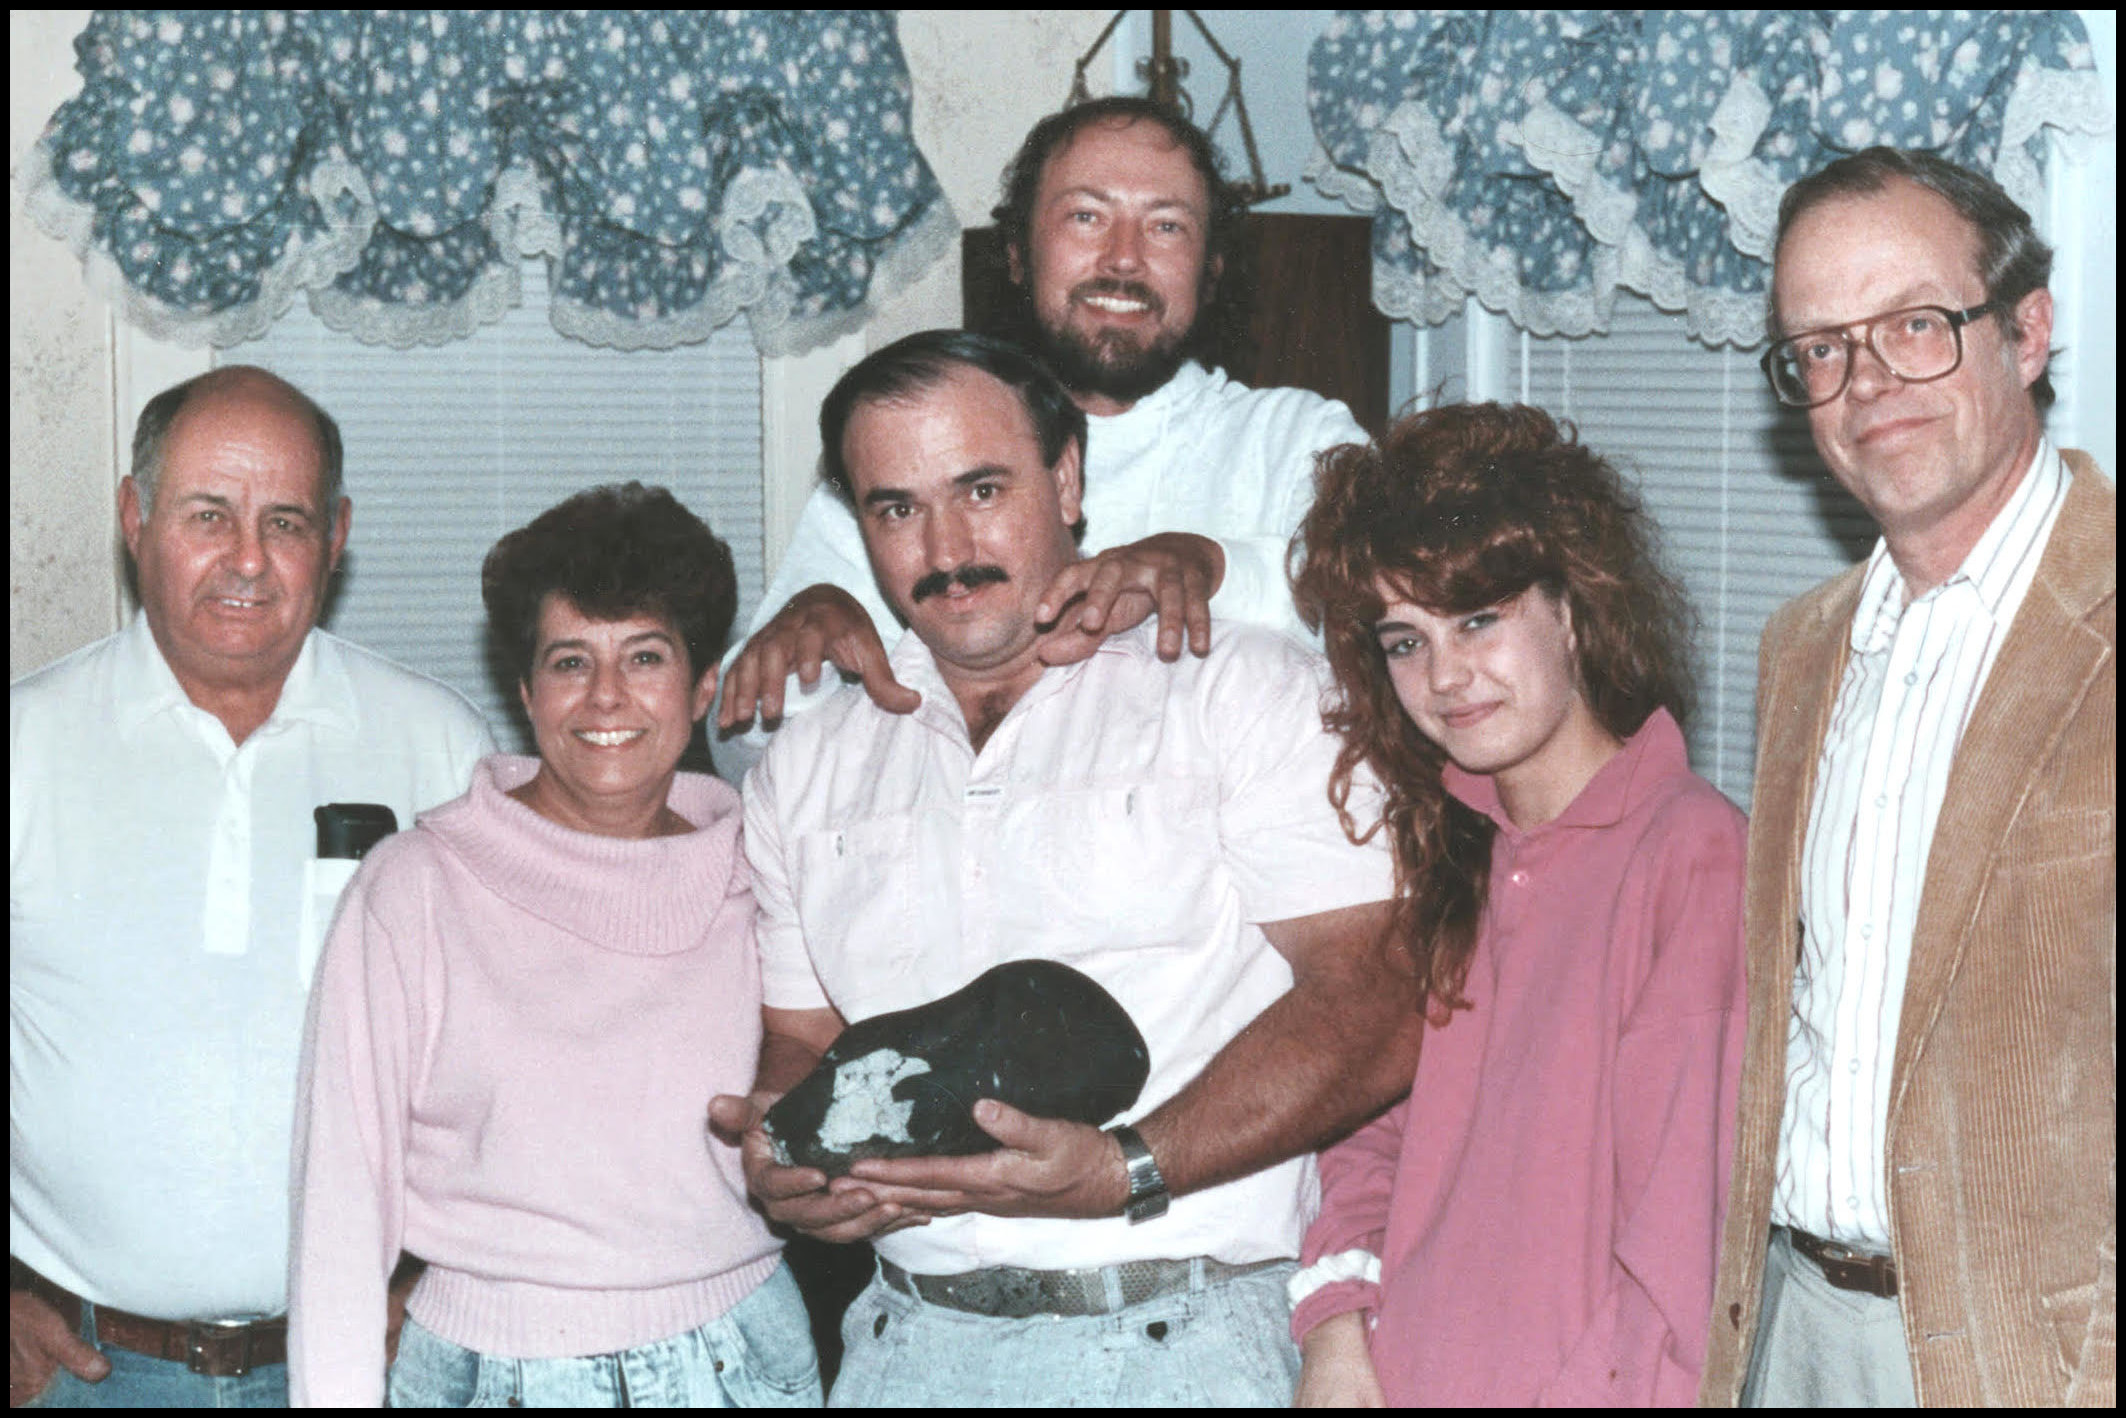 Michelle Knapp with family and the Peekskill Meteorite